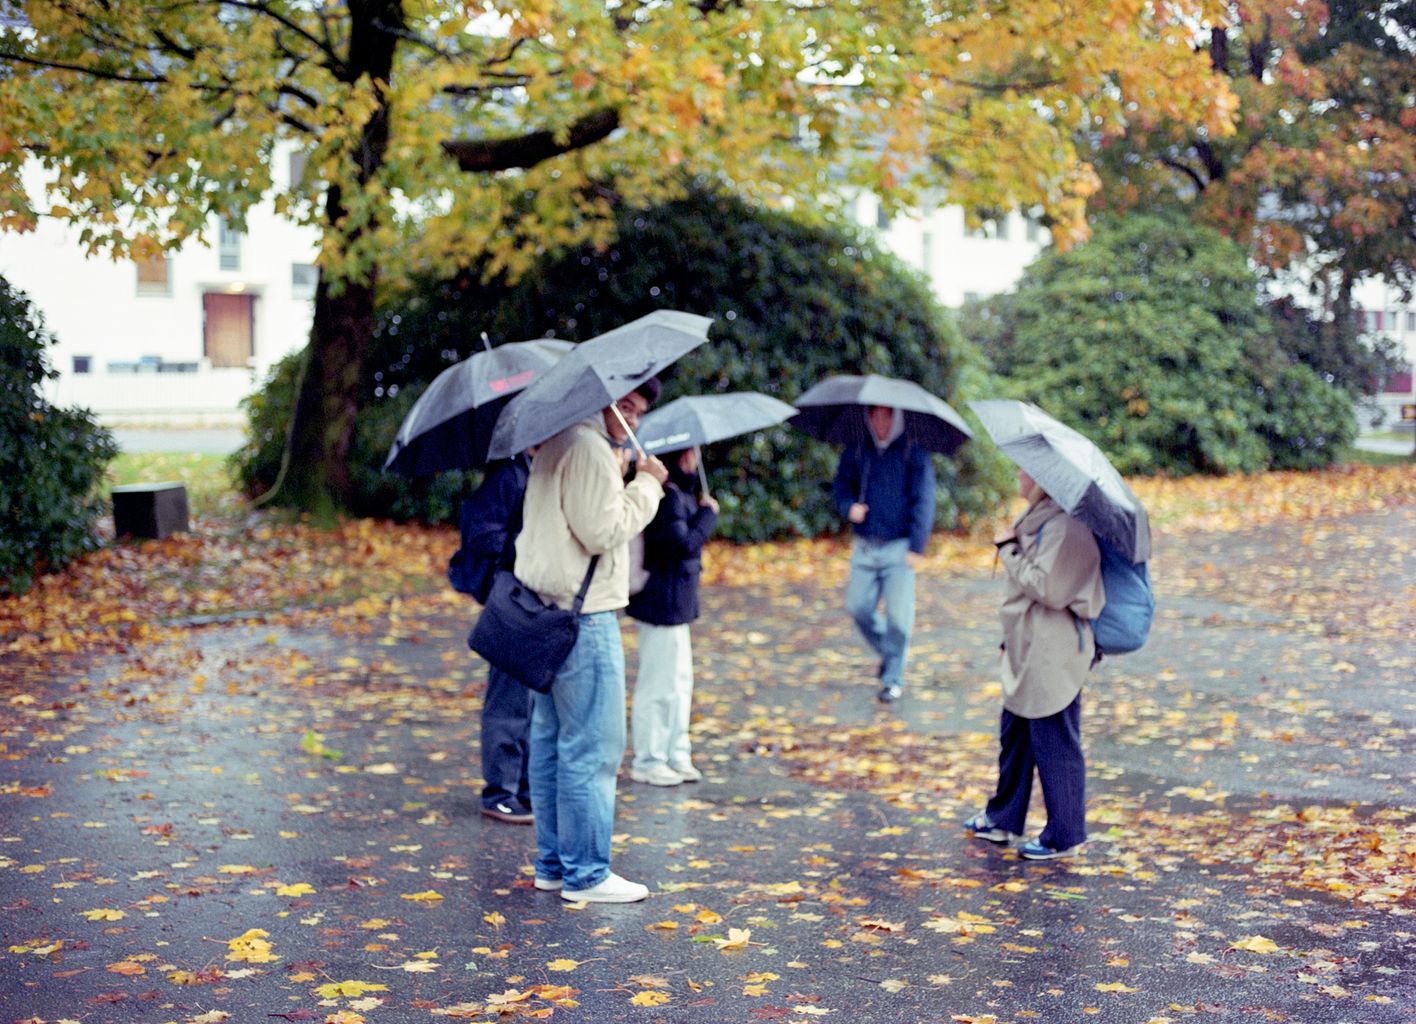  A group of students standing in the rain, holding umbrellas to shield themselves from the downpour.